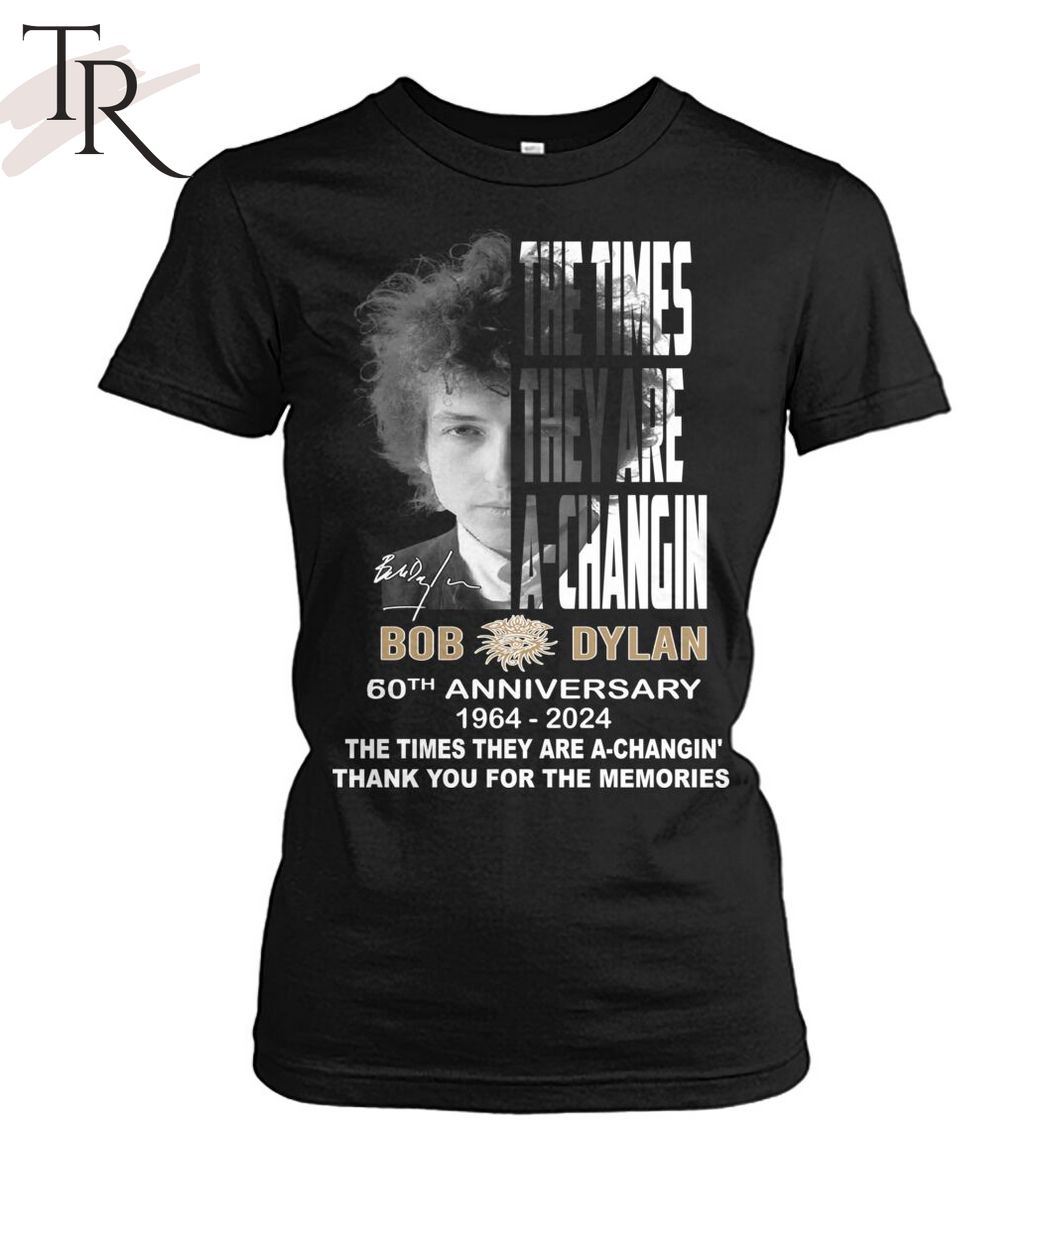 The Times They Are A-Changin Bob Dylan 60th Anniversary 1964-2024 Thank You For The Memories T-Shirt